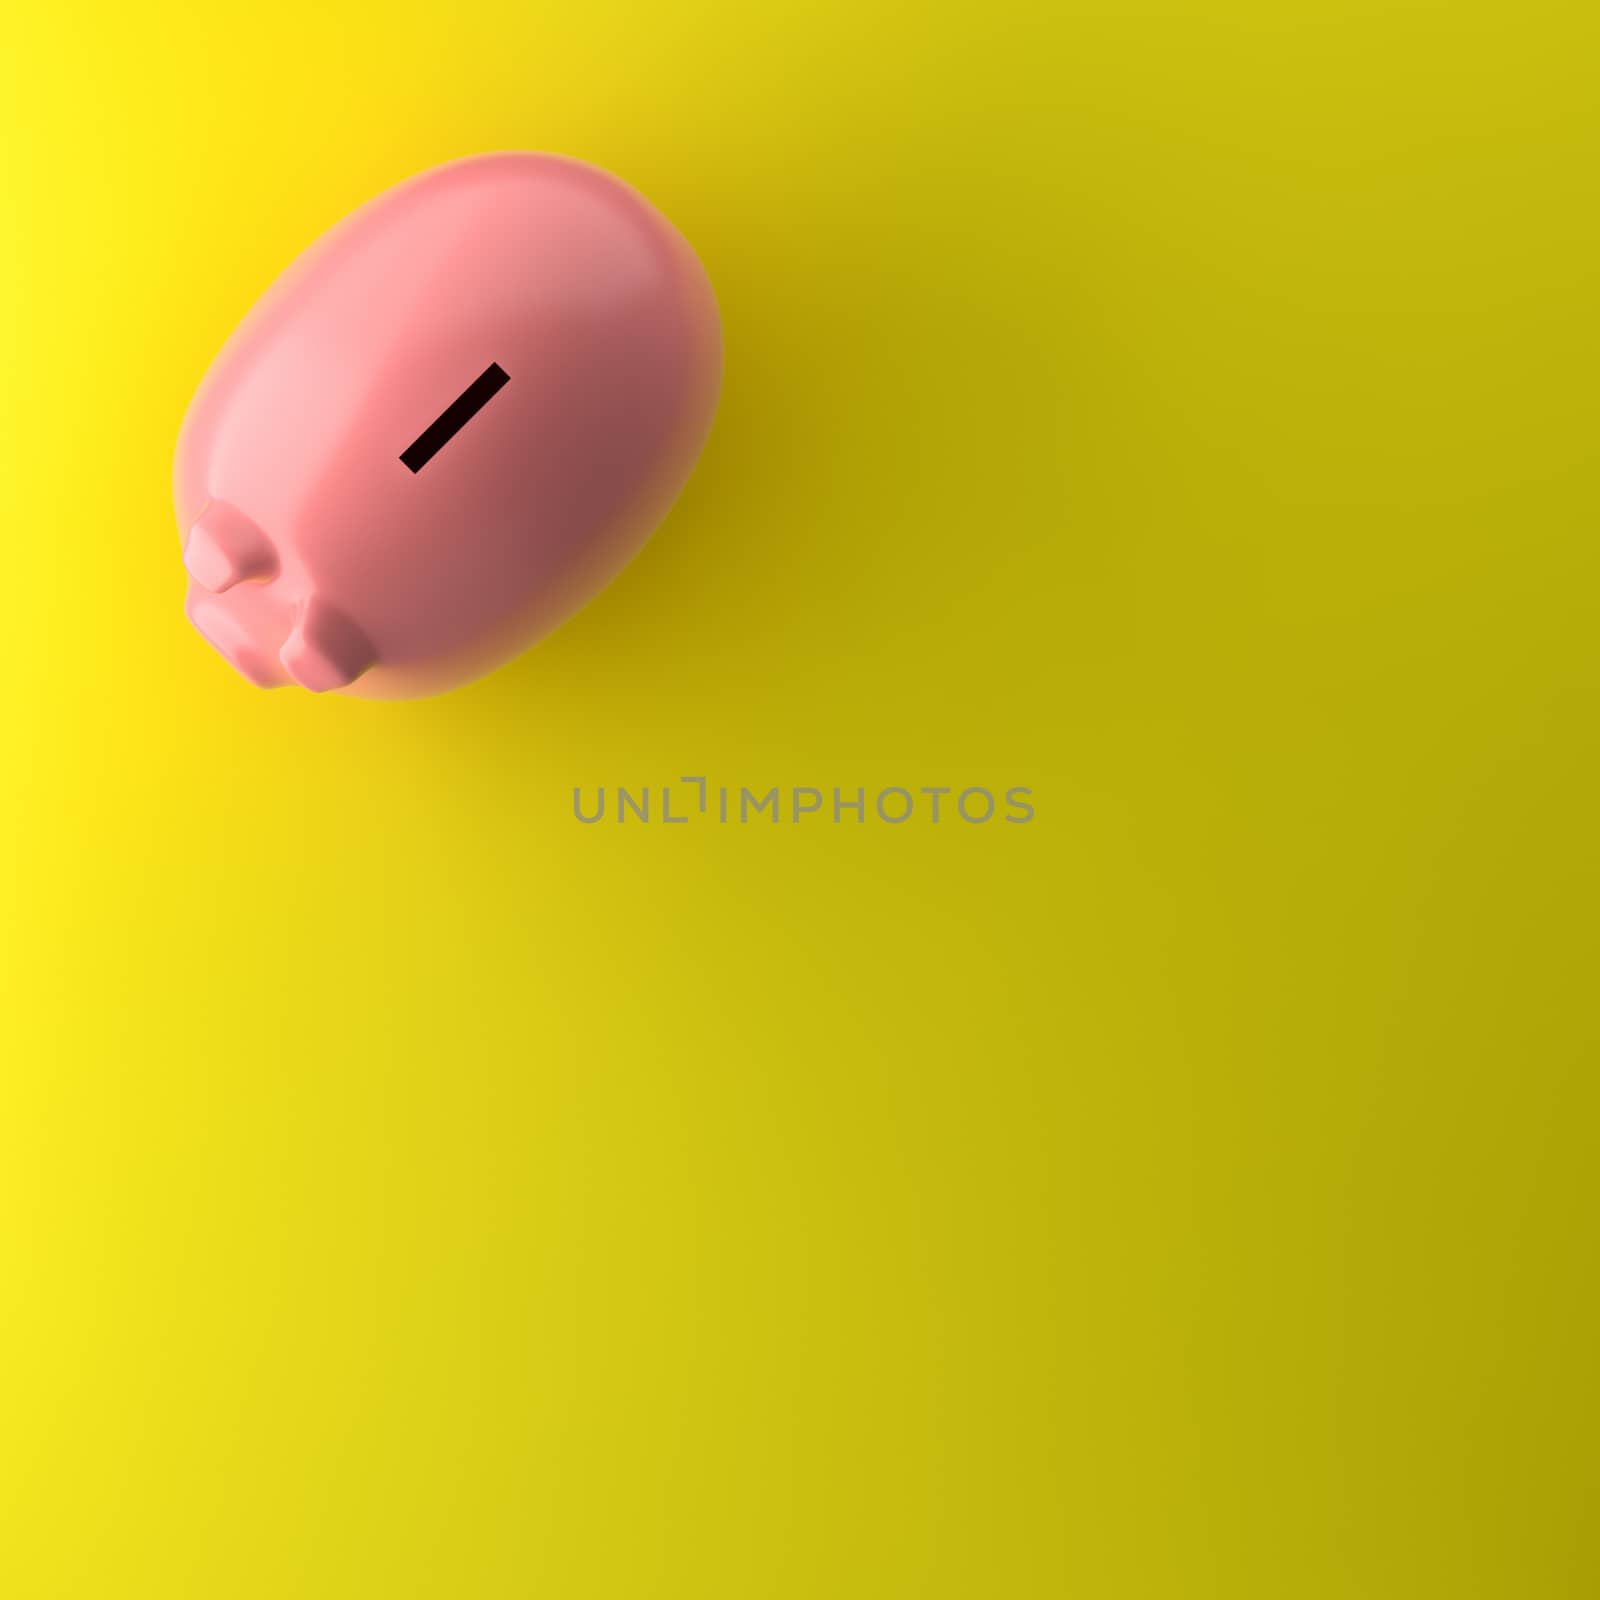 PIGGY BANK ON YELLOW BACKGROUND by PrettyTG